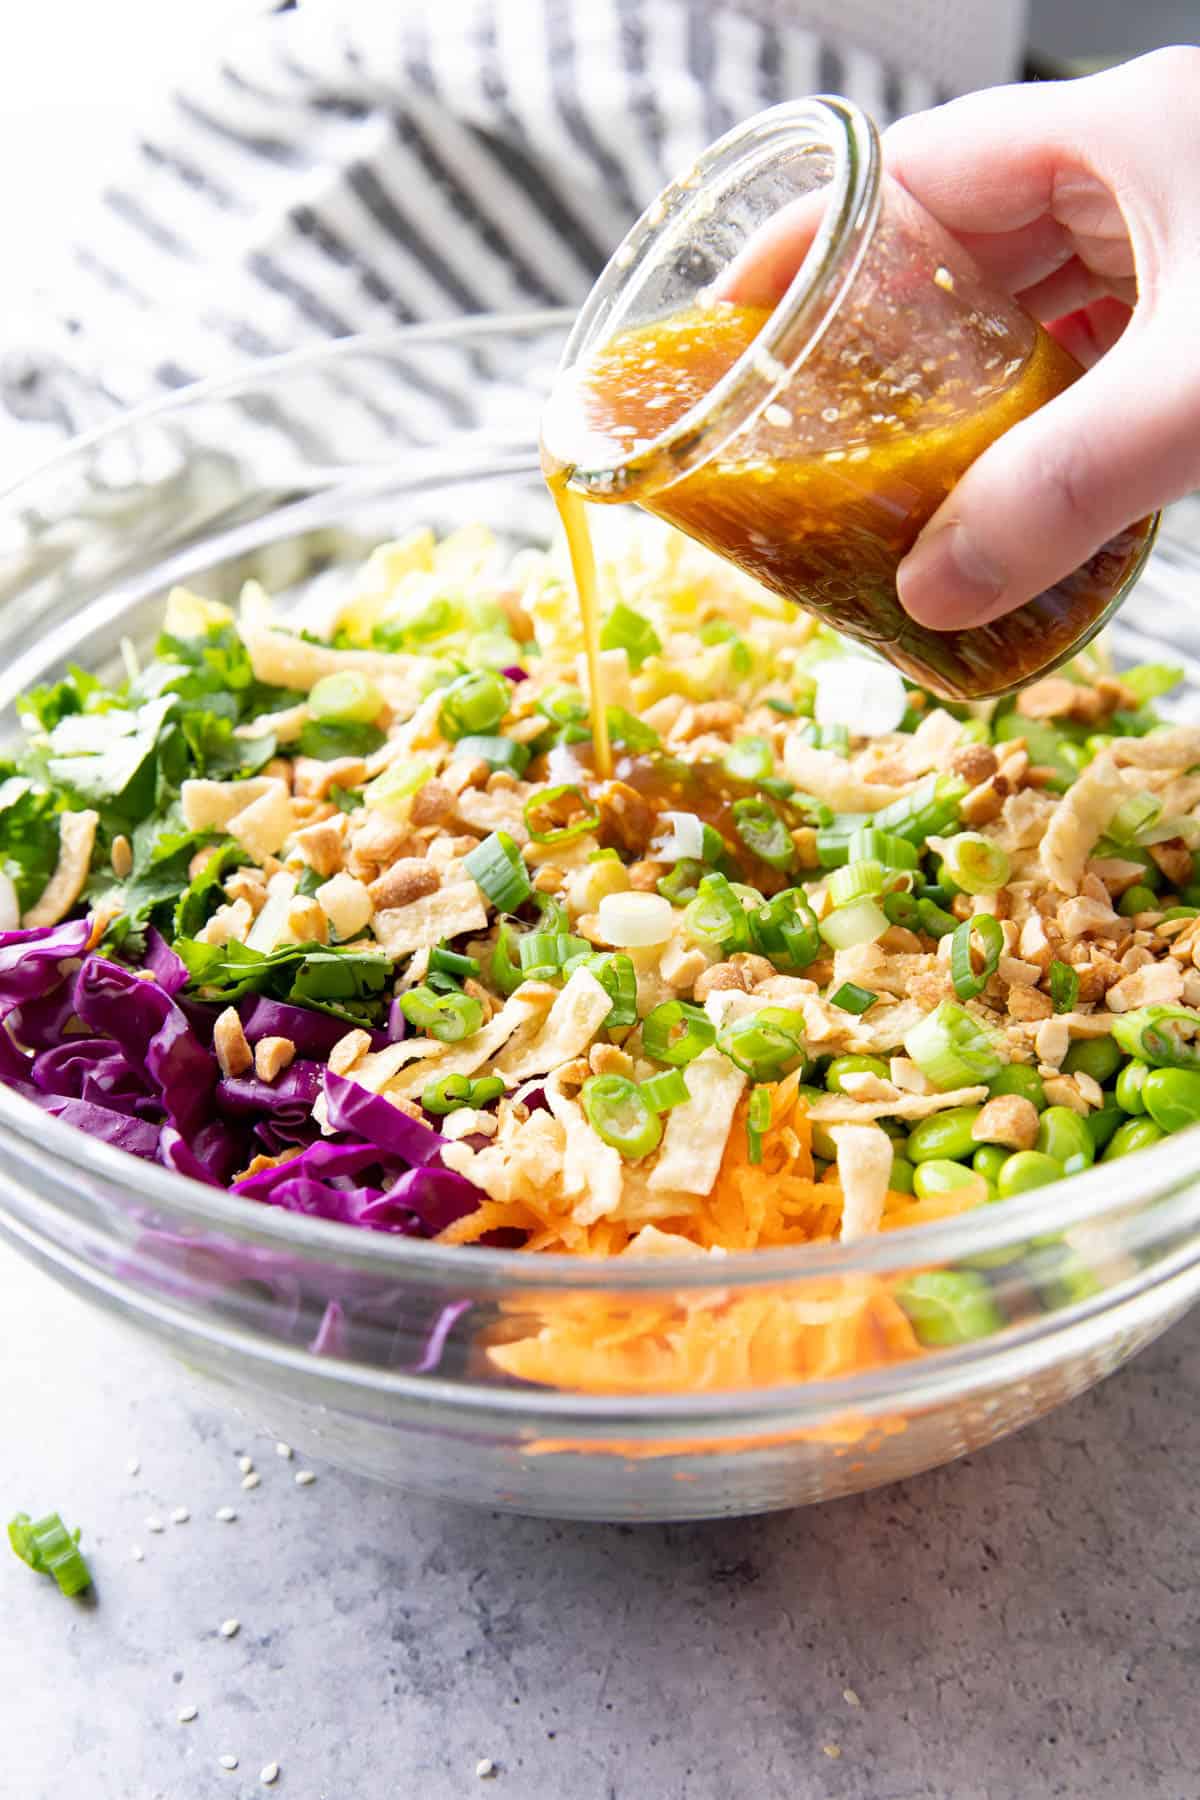 hand pouring jar of dressing over Asian Salad